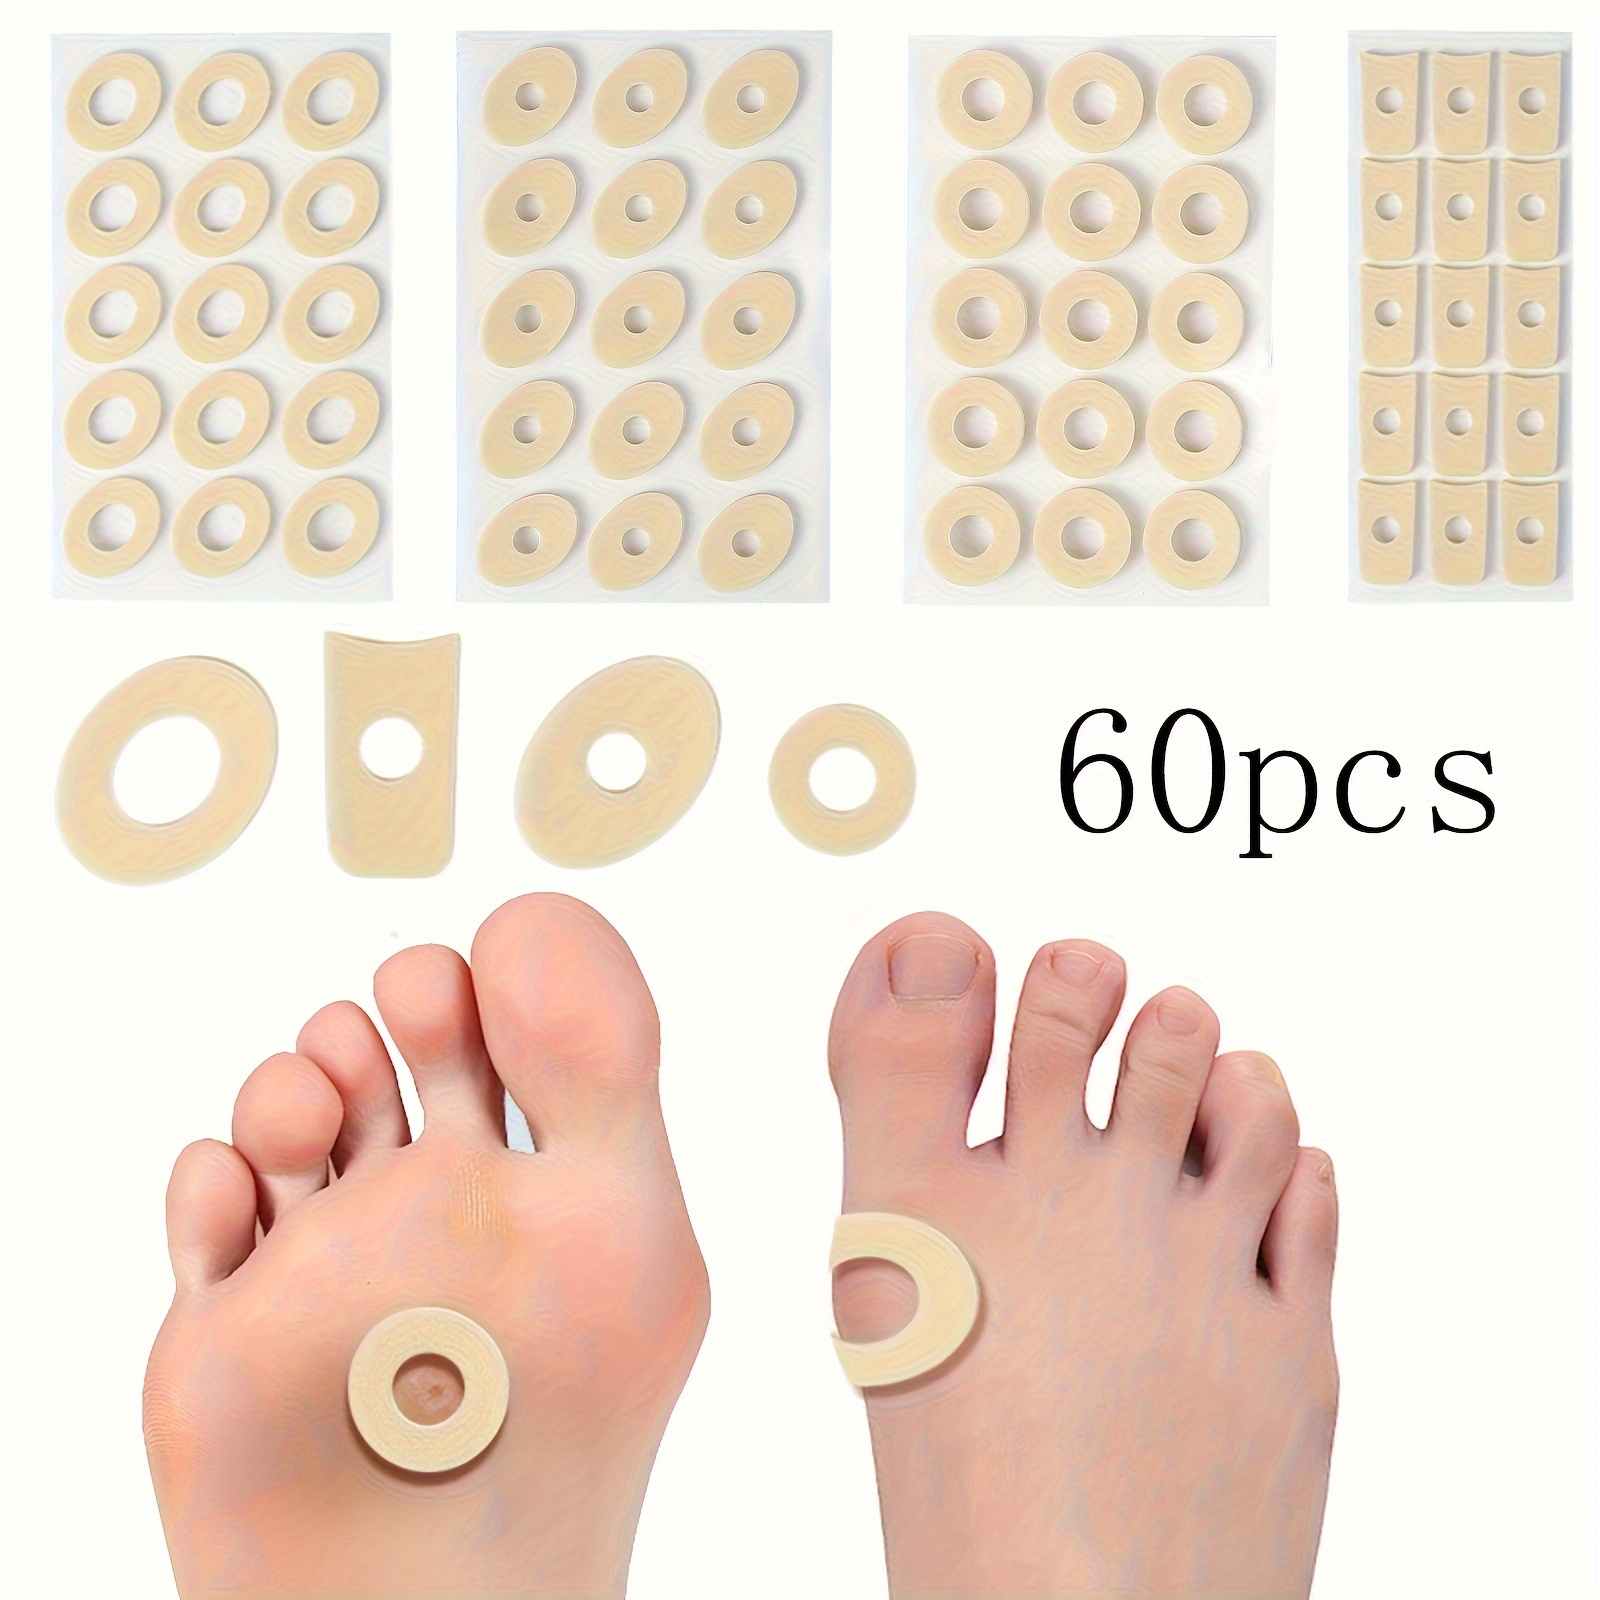 6/48Pcs Foot Corn Remover Pads Plantar Wart Thorn Plaster Patches Callus  Removal 